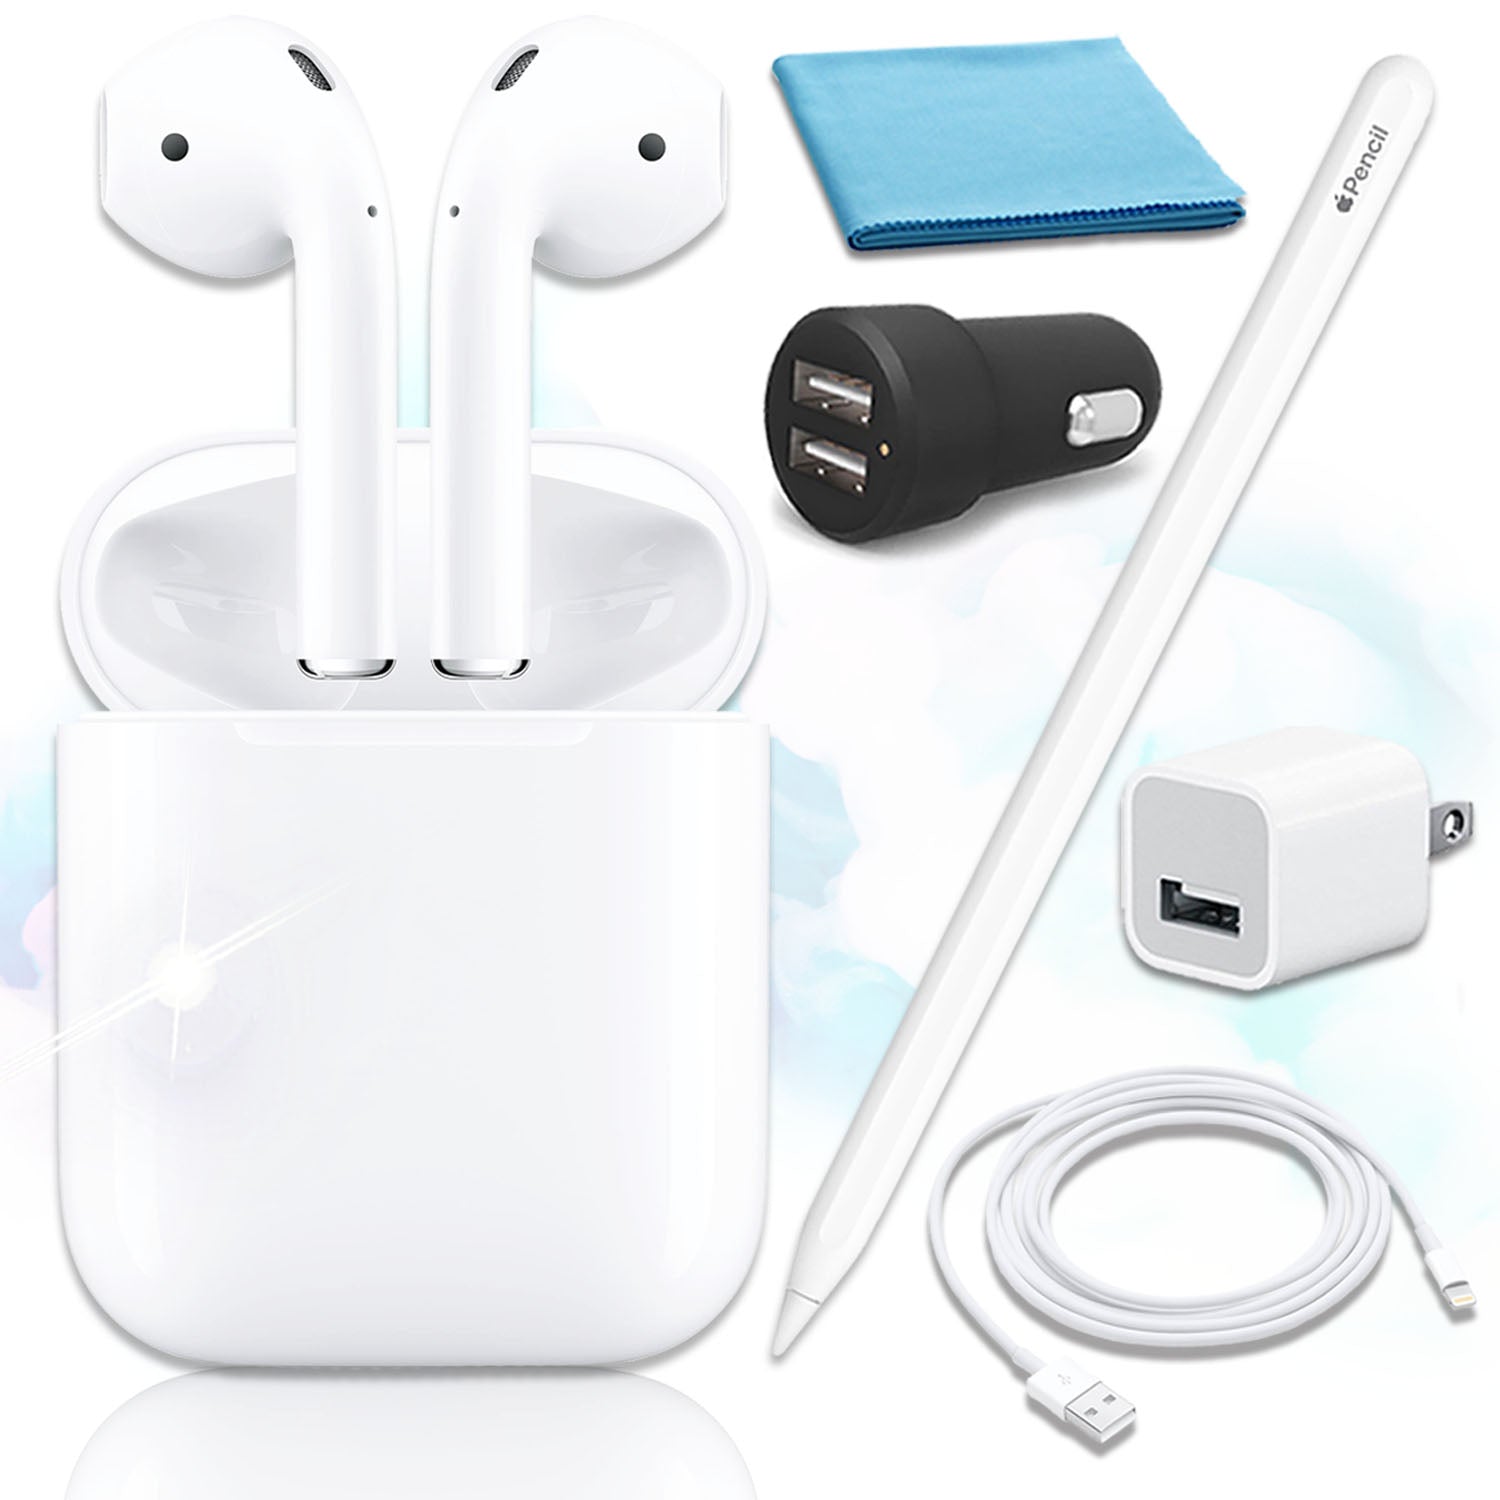 Apple Airpod 2 Wired Charging Case with Apple Pencil 2 Bundle